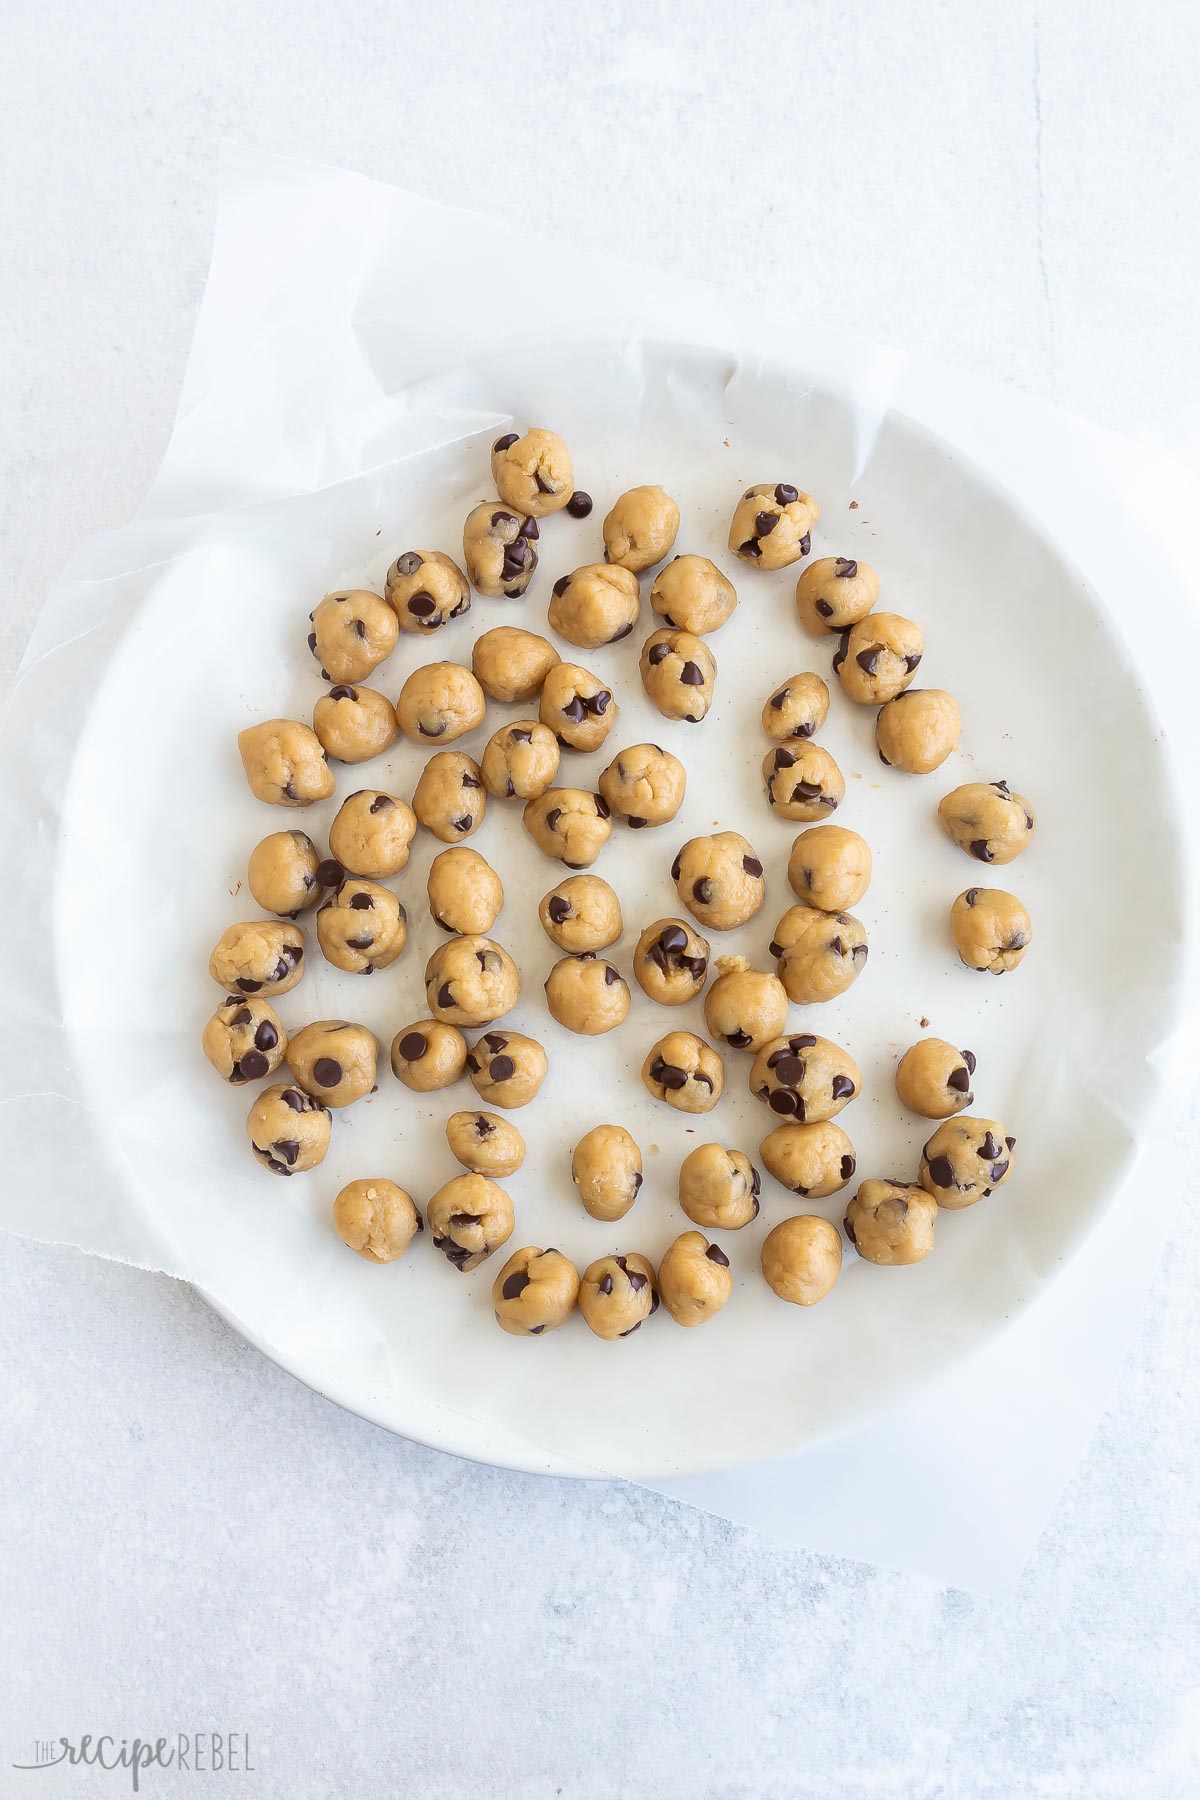 unbaked cookie dough balls on a plate.